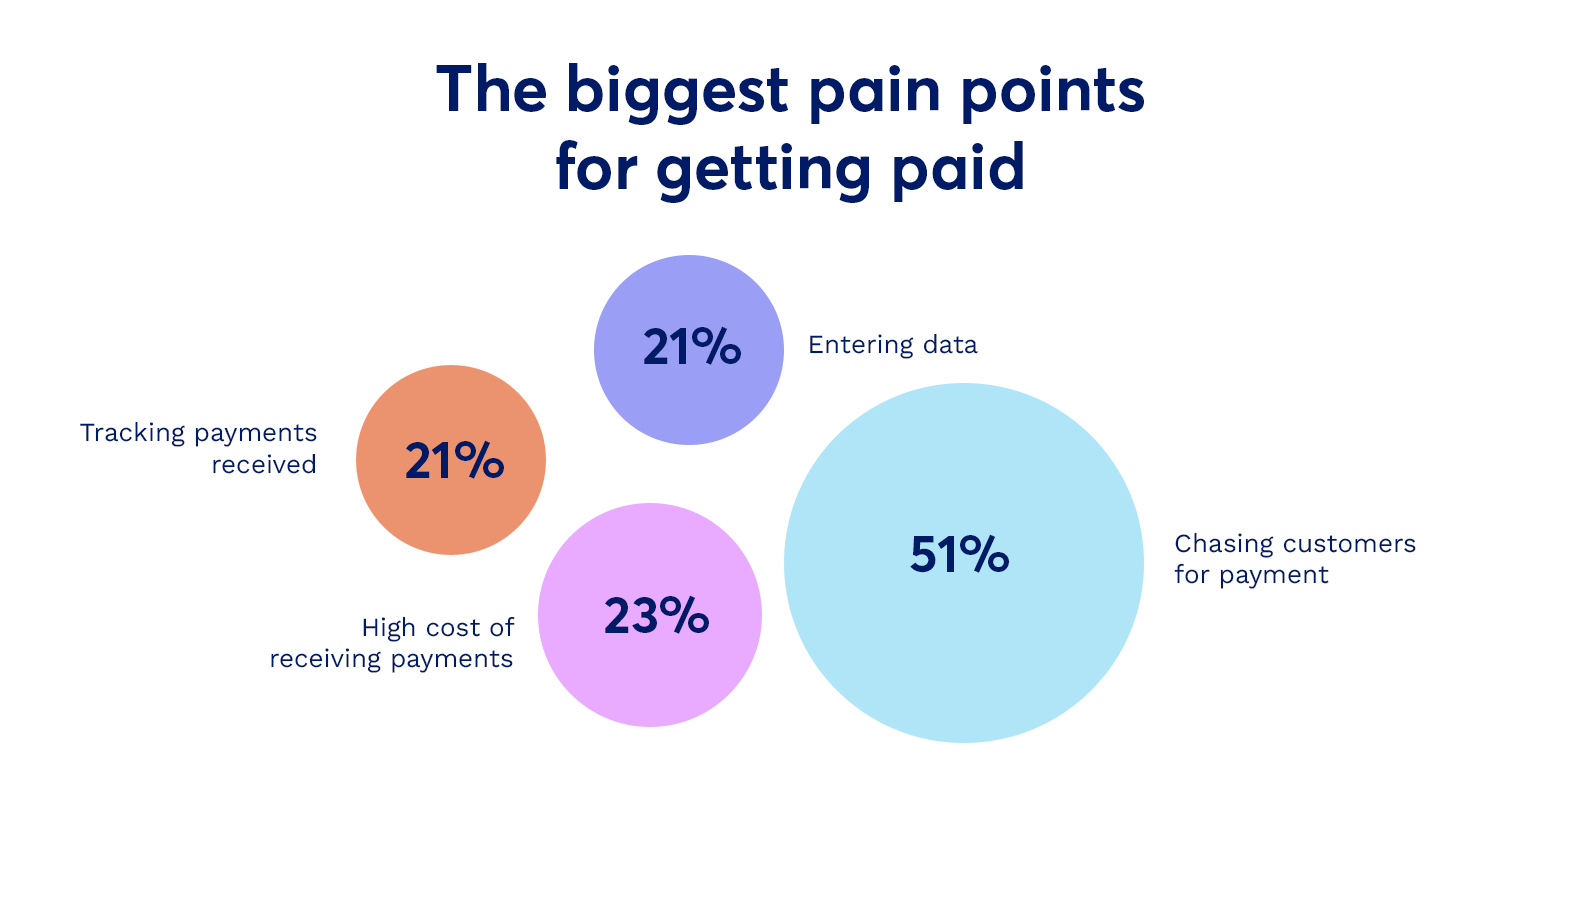 A diagram showing “The biggest pain points for getting paid by customers.” A large blue circle that says “51%” and represents the amount of small business owners chasing after customers who delay/default their payments.” A smaller pink circle says “23%,” and refers to the cost of receiving payments being too expensive. A slightly smaller orange circle says “21%” and represents keeping track of all payments received. Another purple circle says “21%” and represents entering data.